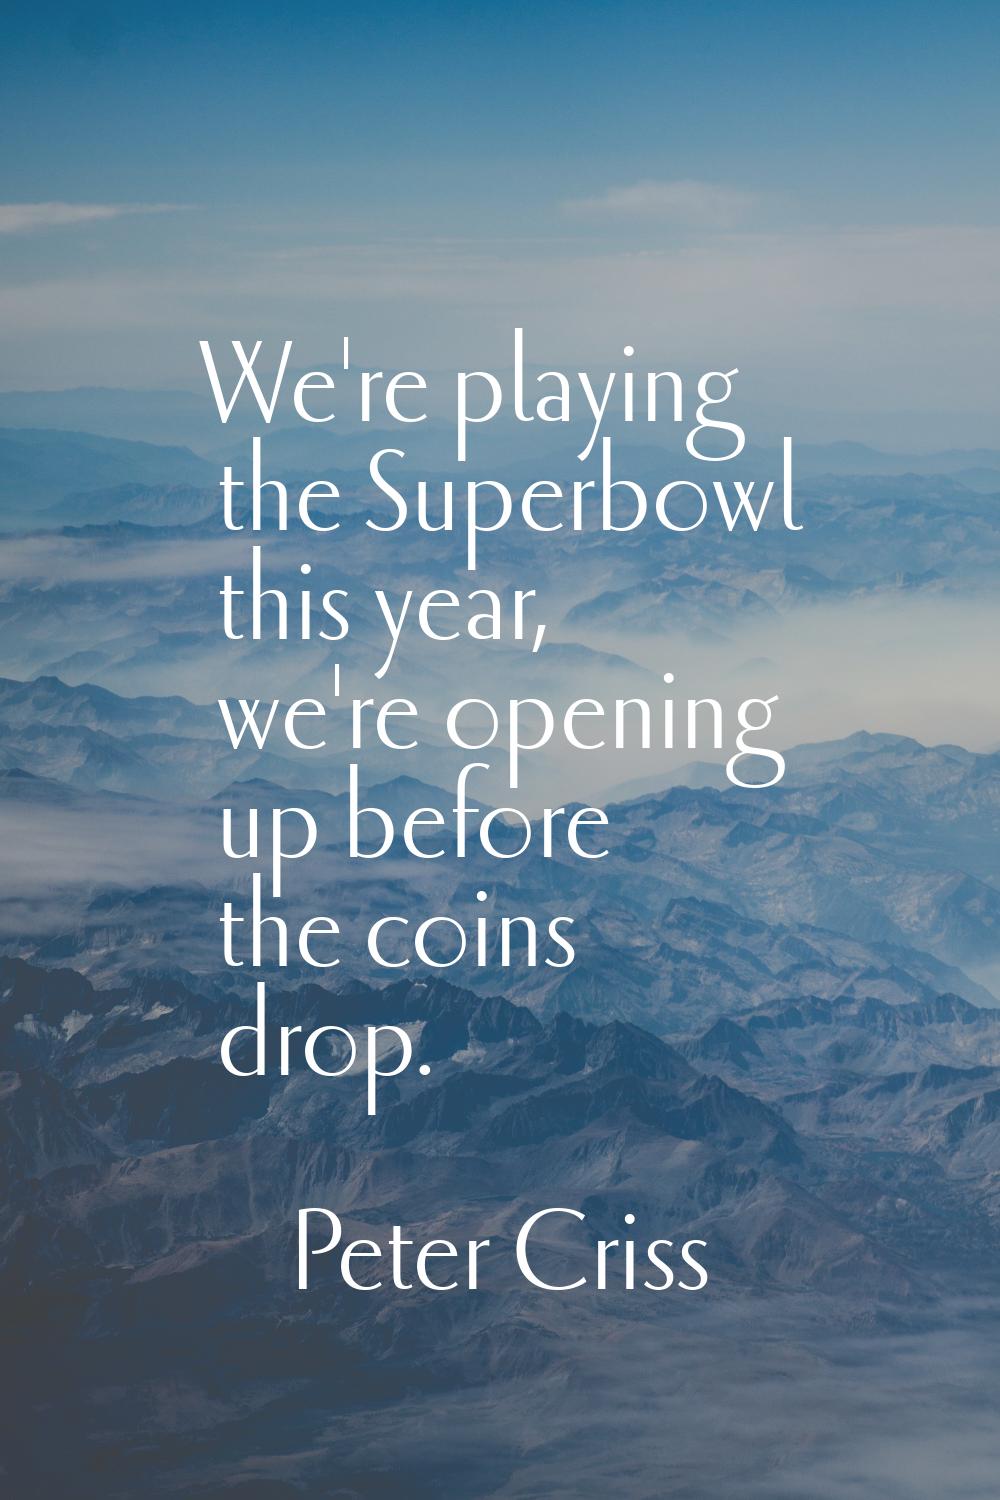 We're playing the Superbowl this year, we're opening up before the coins drop.